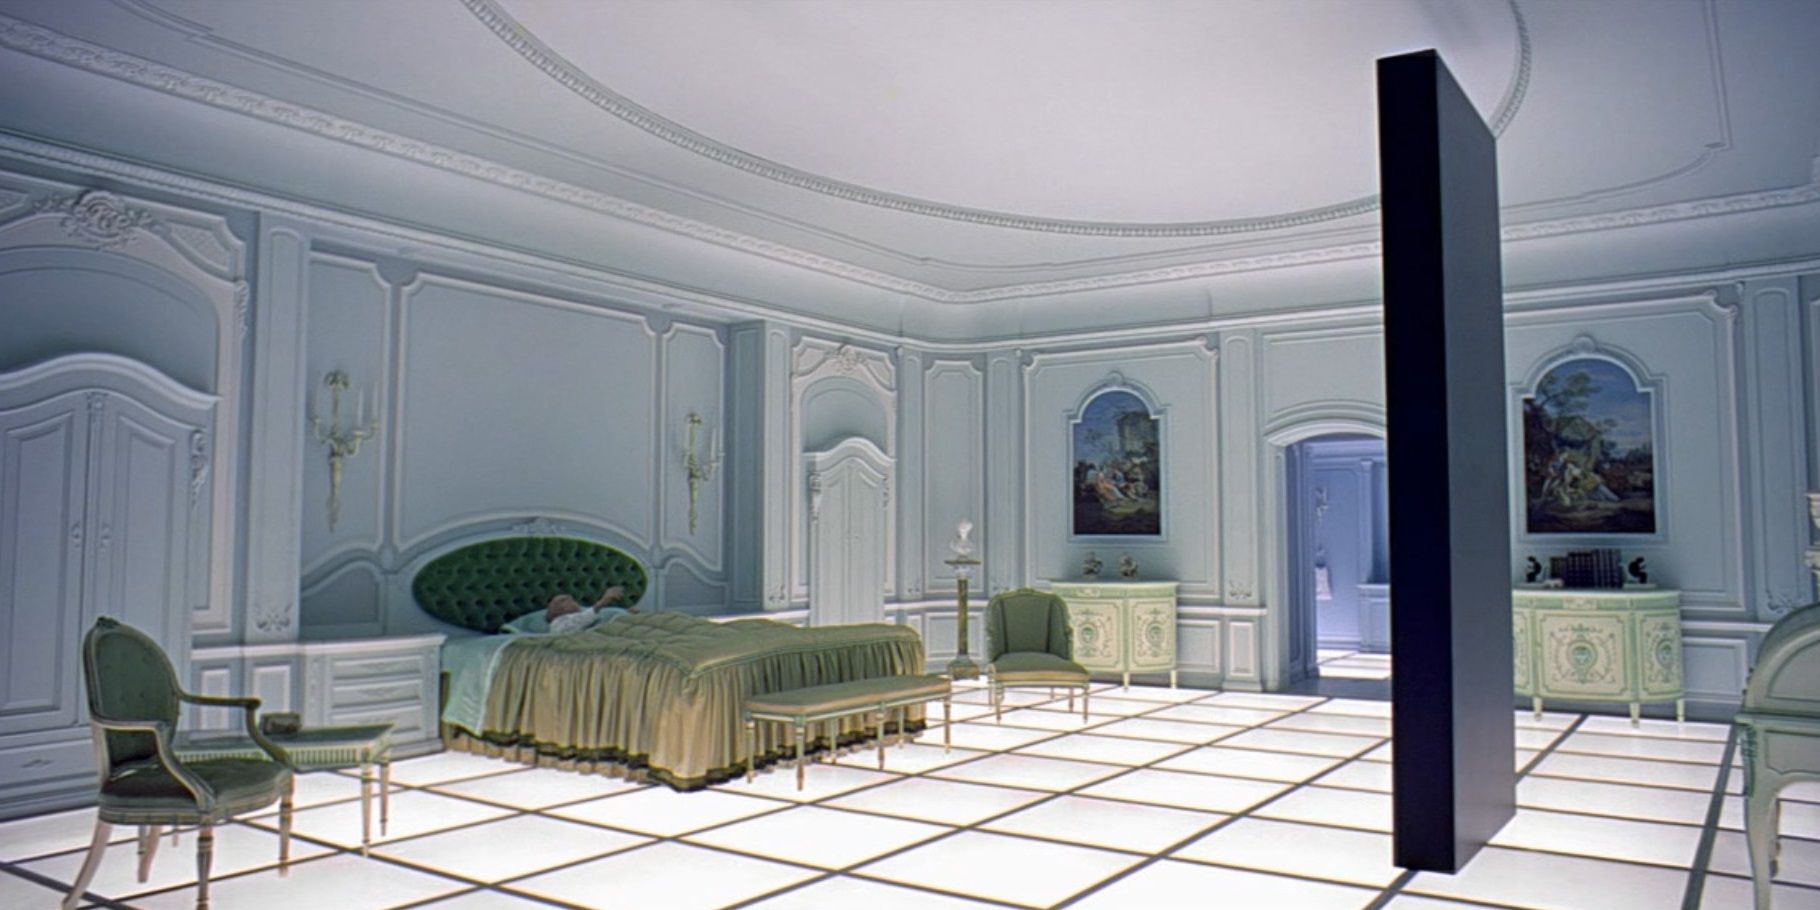 The monolith in the bedroom in 2001: A Space Odyssey